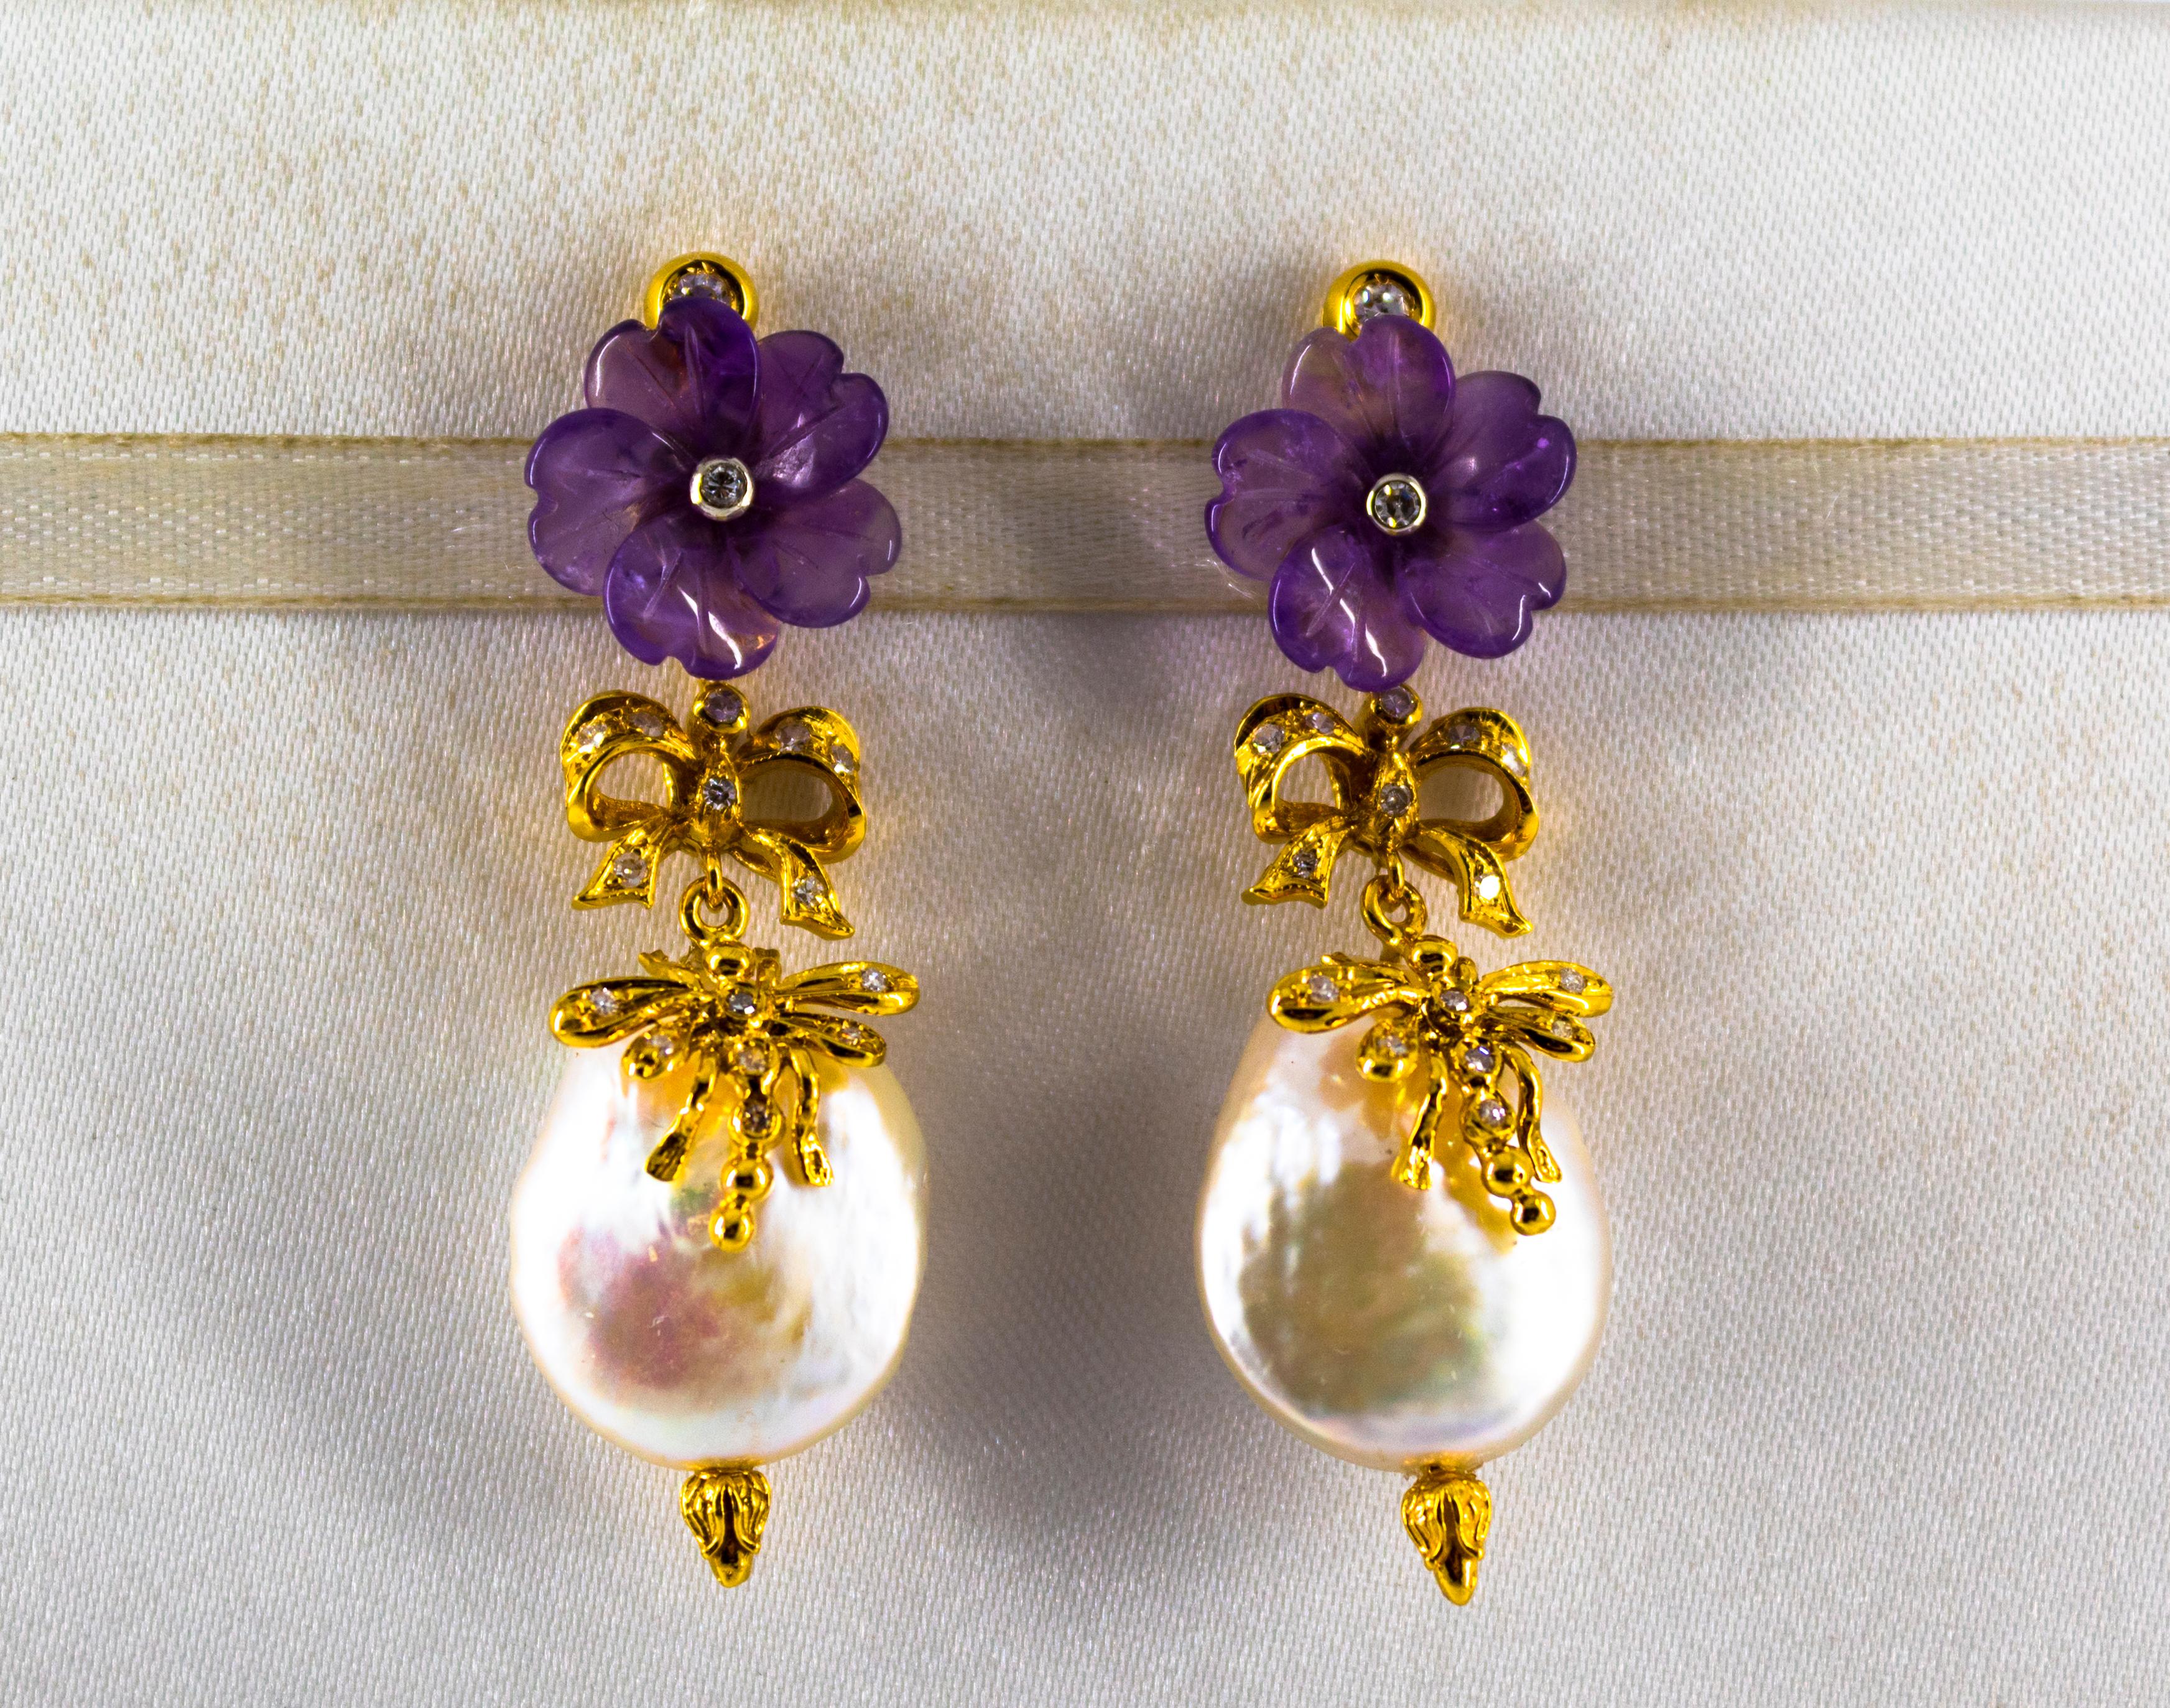 These Stud Earrings are made of 14K Yellow Gold.
These Earrings have 0.40 Carats of White Brilliant Cut Diamonds.
These Earrings have also Pearls and Amethyst.

These Earrings are available also with Green Flowers made of Agate or White Flowers made